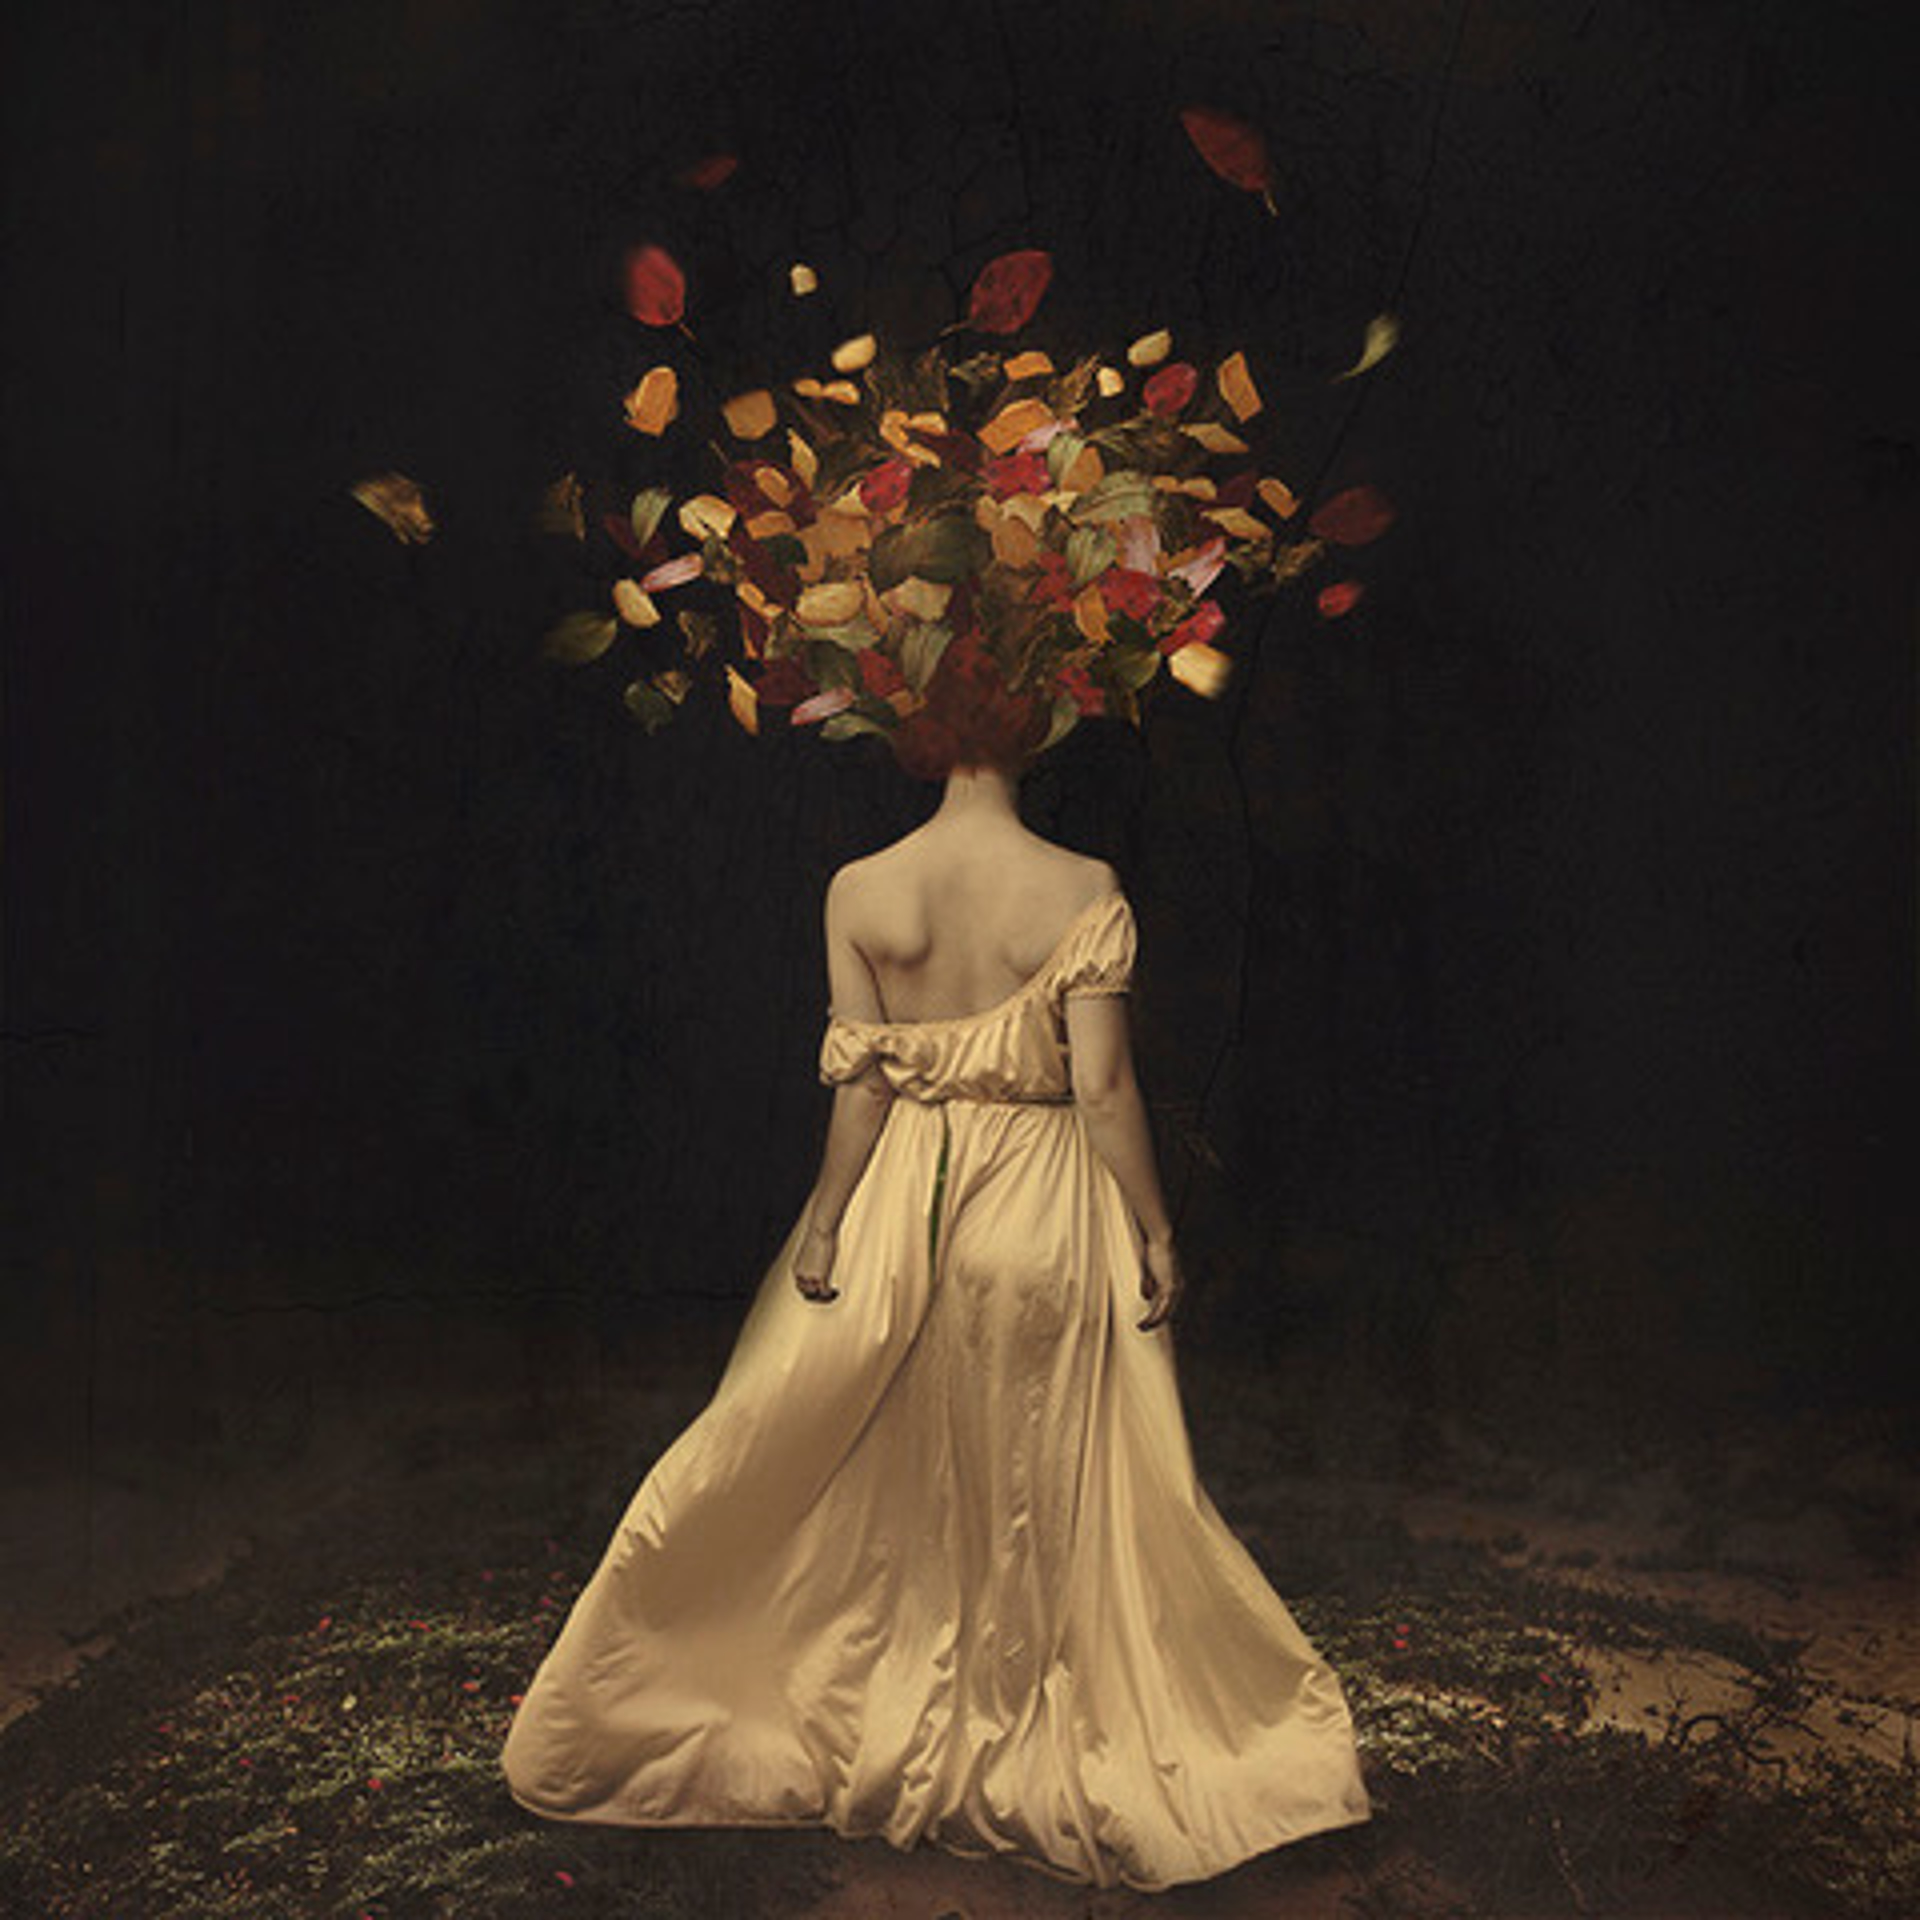 The Falling of Autumn Darkness by Brooke Shaden